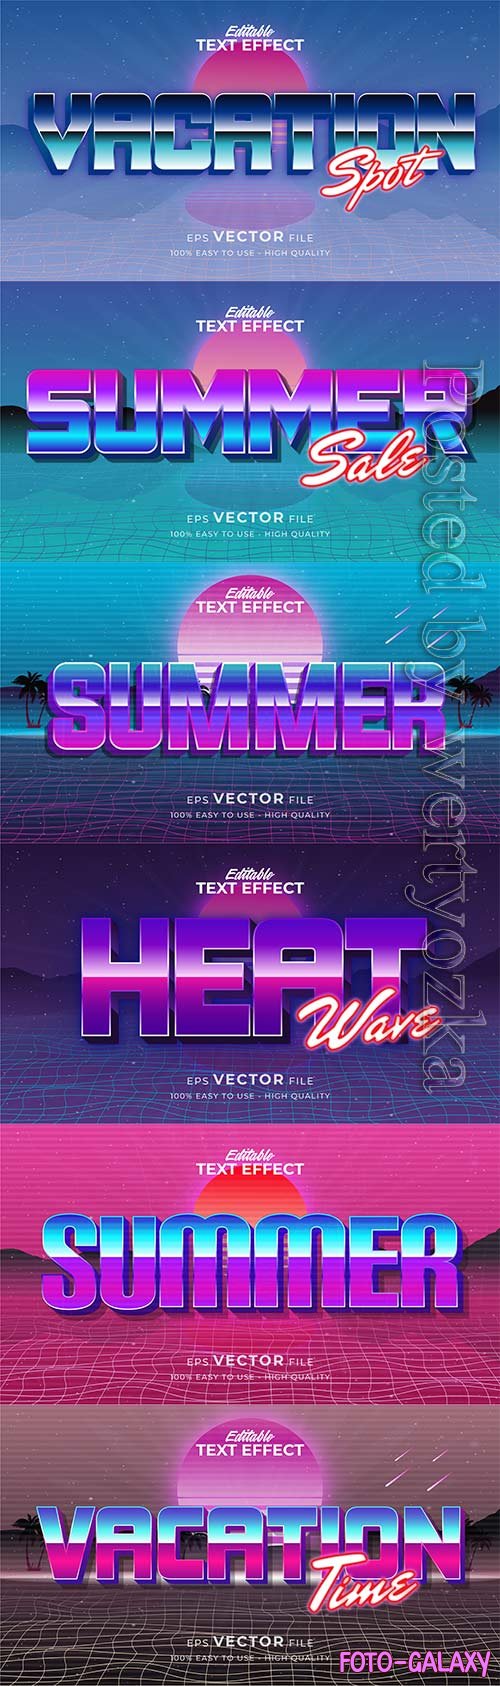 Text style effect, retro summer text in grunge style vol 7